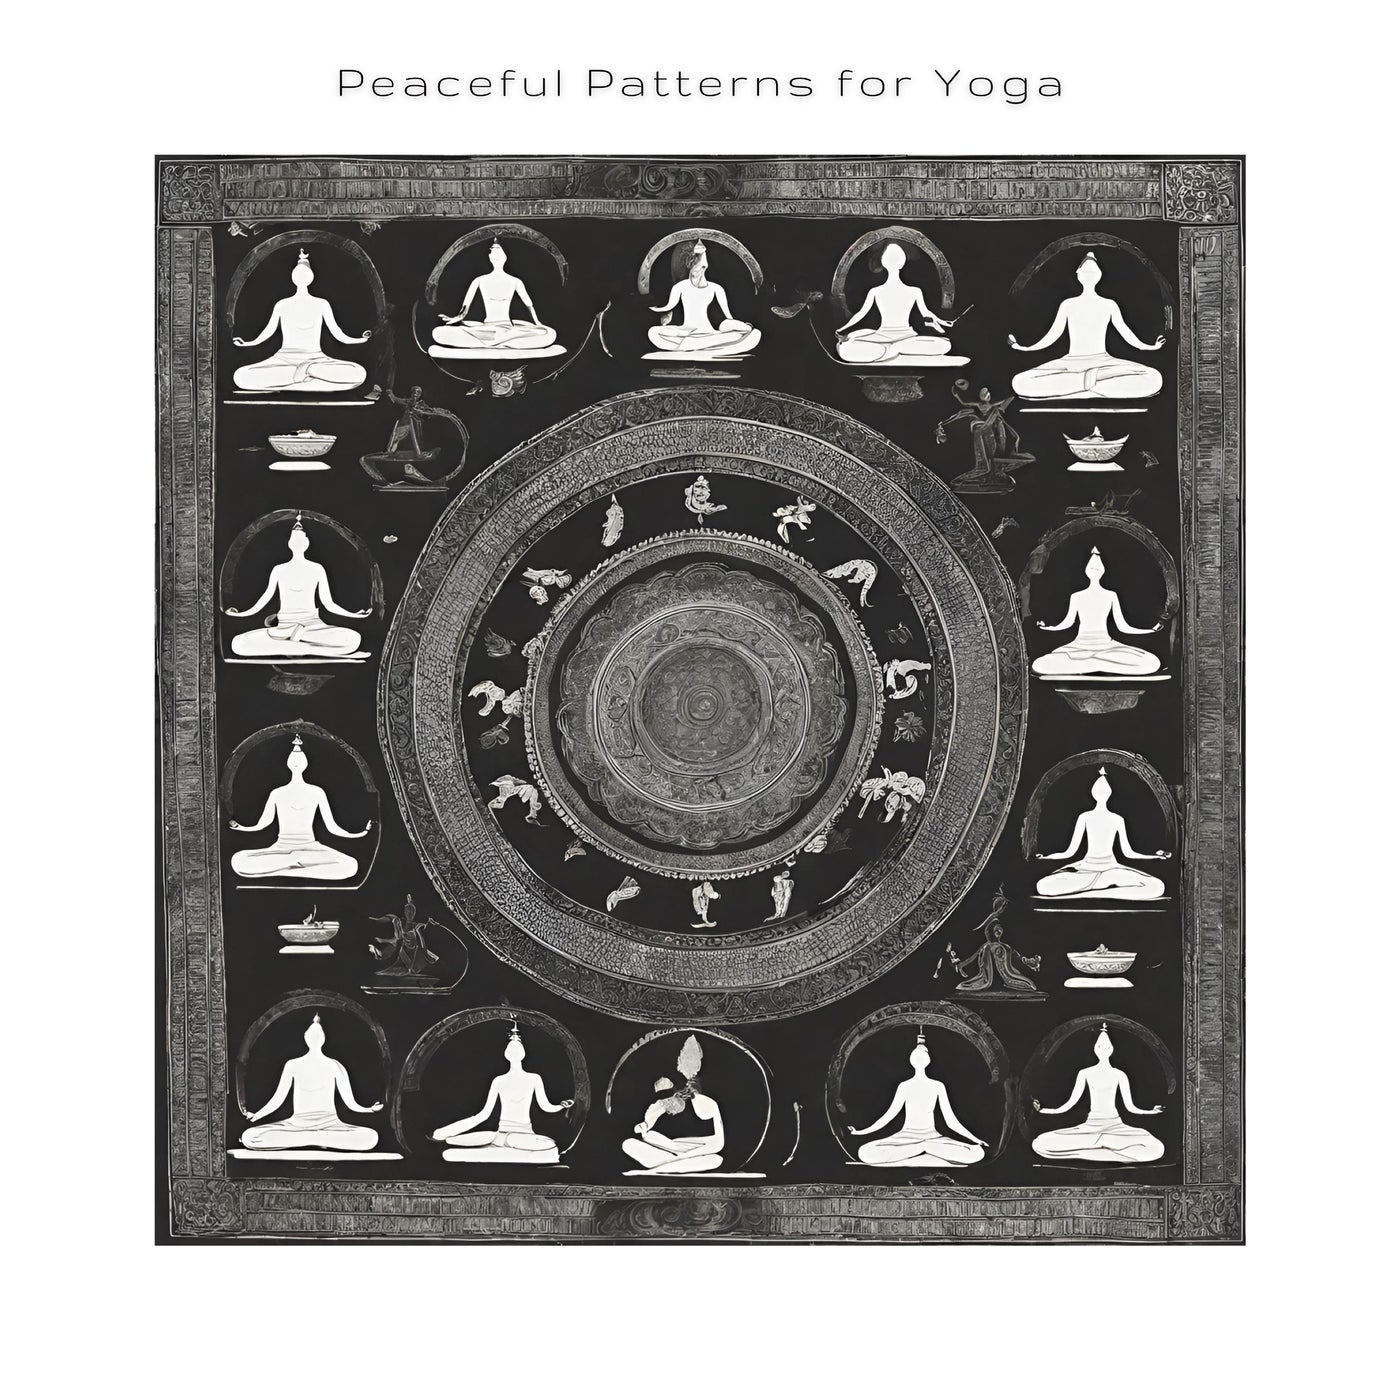 Peaceful Patterns for Yoga